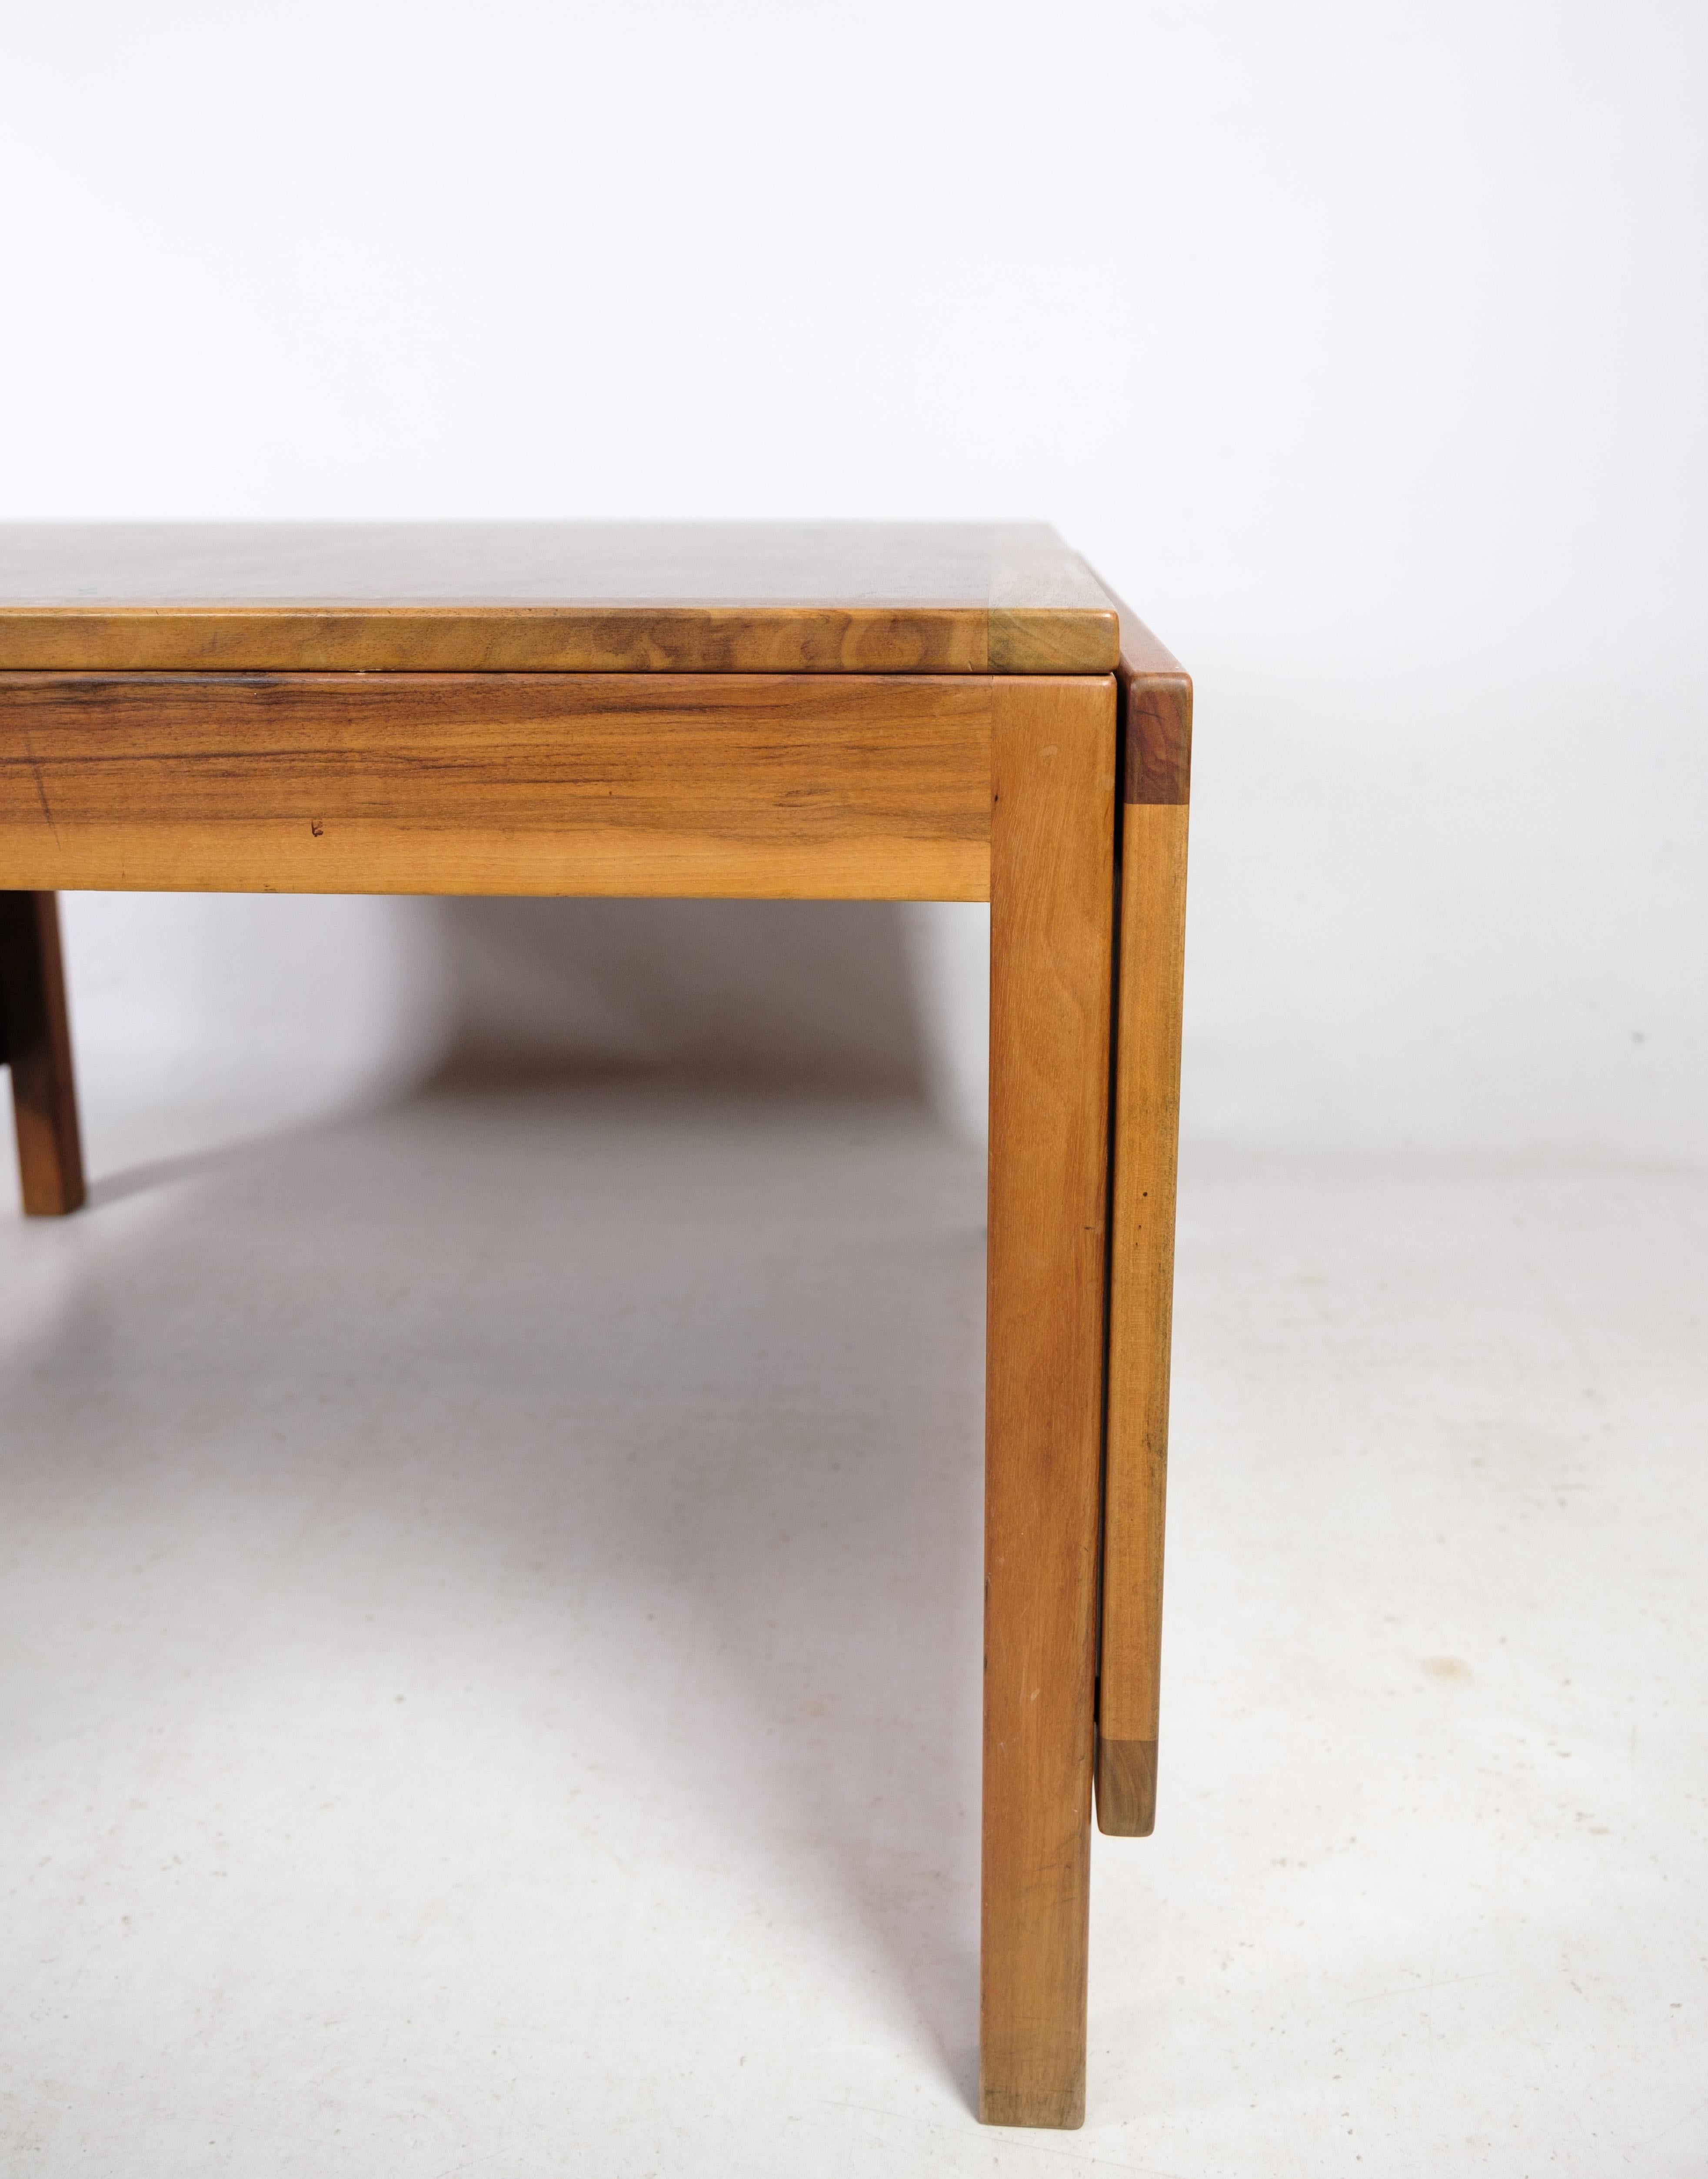 Coffee Table, Model 5362 By Børge Mogensen Made By Fredericia Furniture 1960s im Zustand „Gut“ im Angebot in Lejre, DK